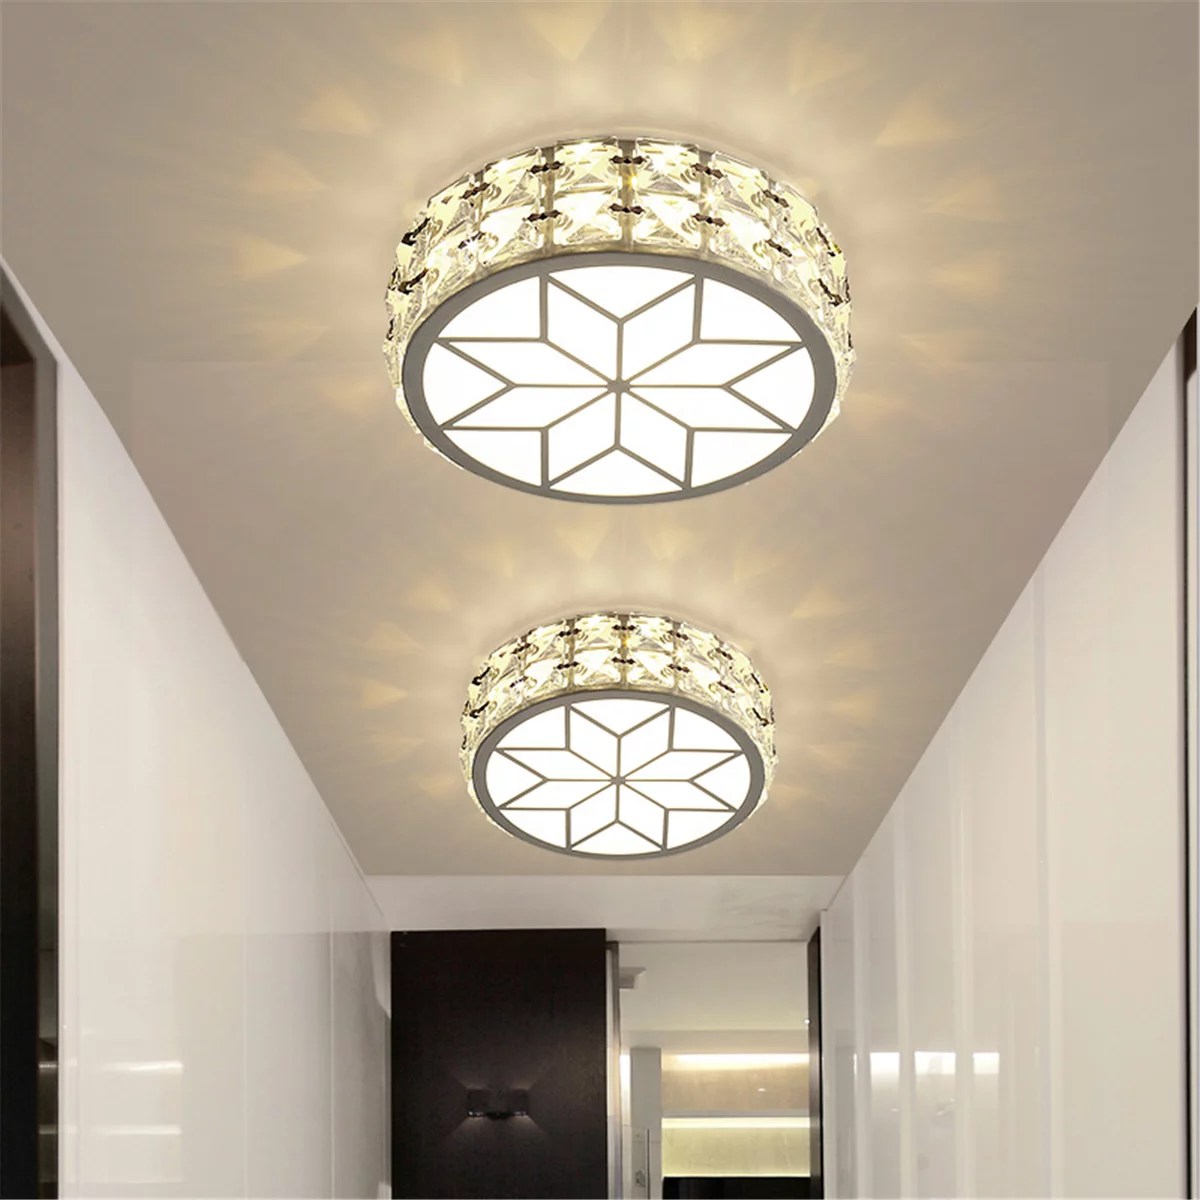 Modern Crystal Ceiling Light Fixture, 7" Round Acrylic Ceiling Lamp